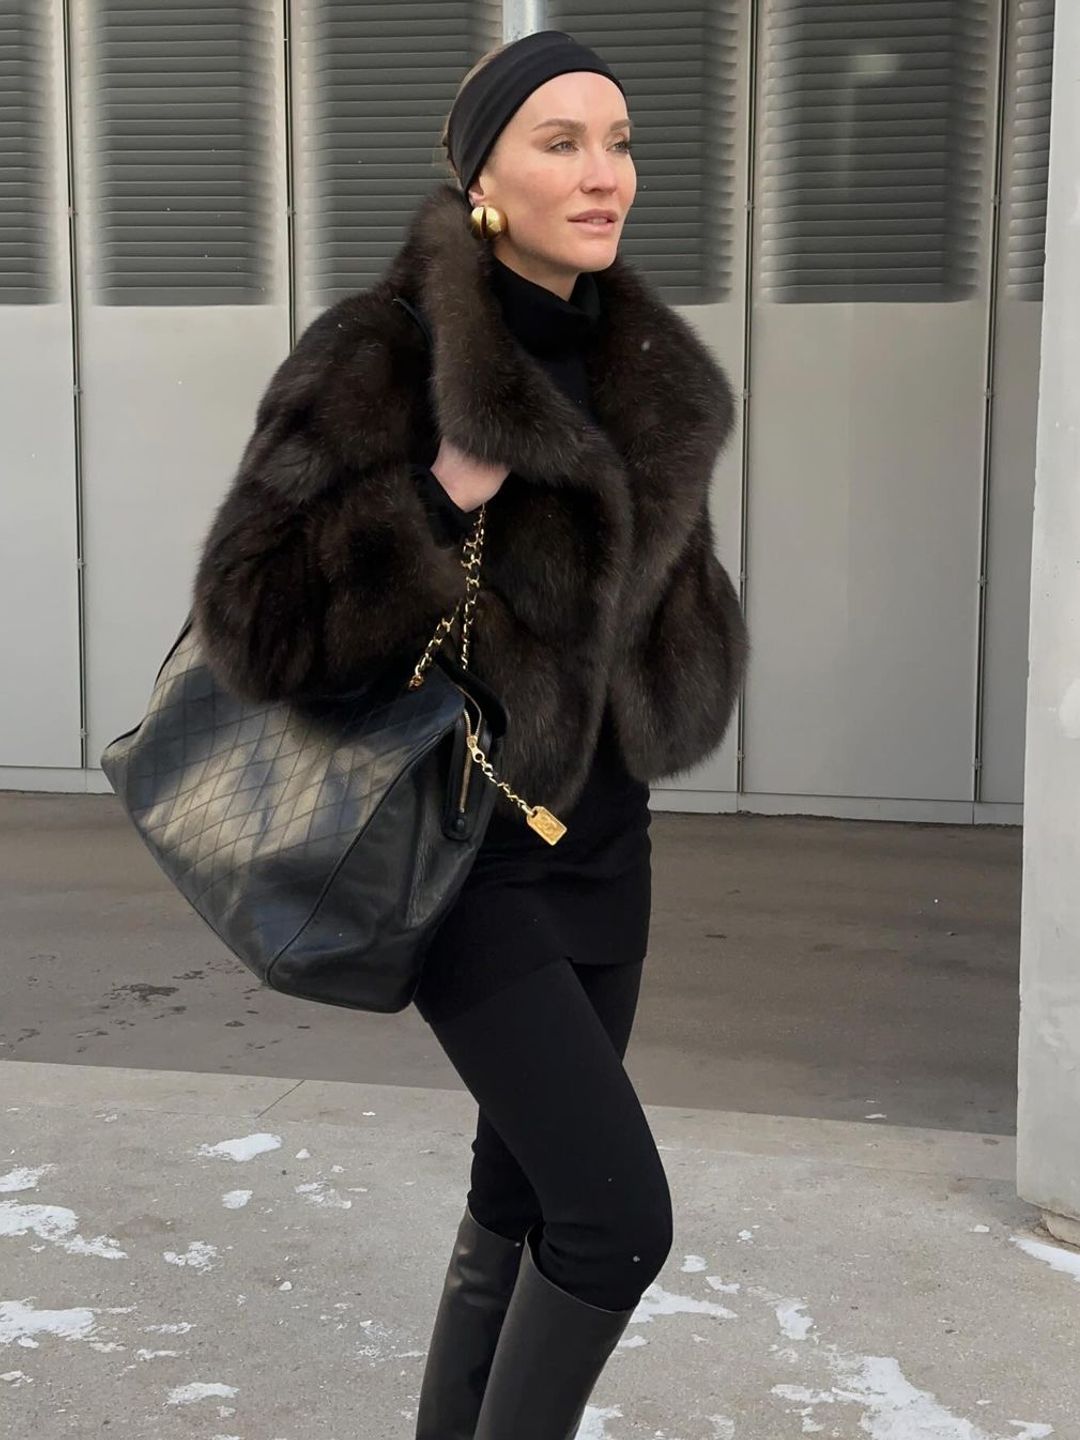 Instagram style mogul @tetyamotya wears a brown fur coat over a black mini dress and tights for a walk in the snow